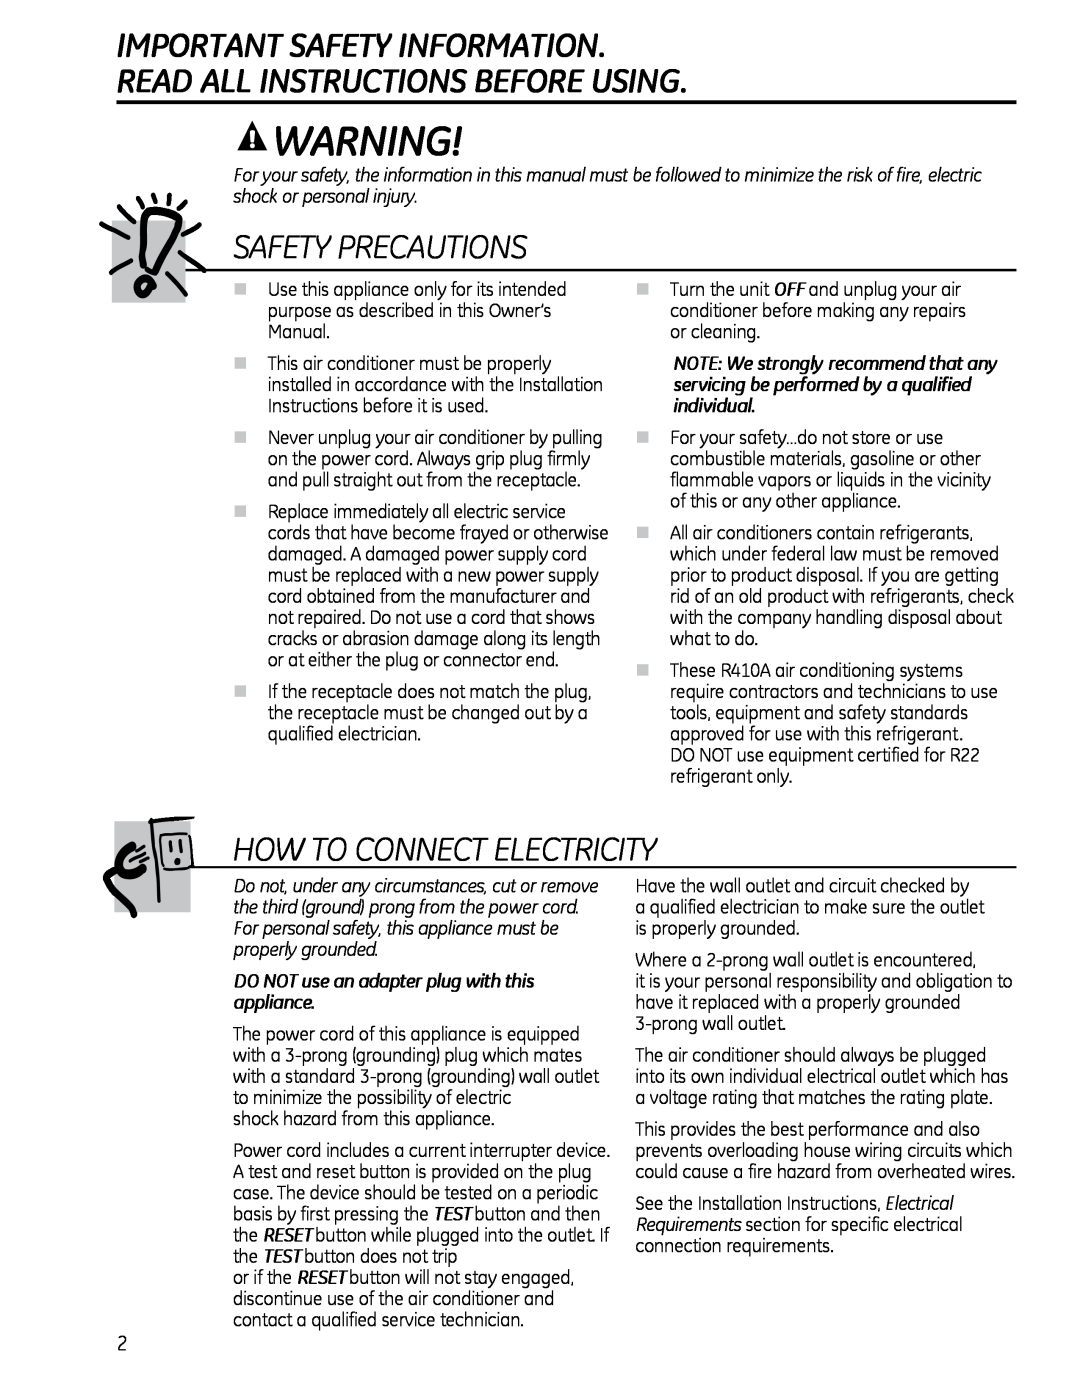 GE 880 Important Safety Information, Read All Instructions Before Using, Safety Precautions, How To Connect Electricity 